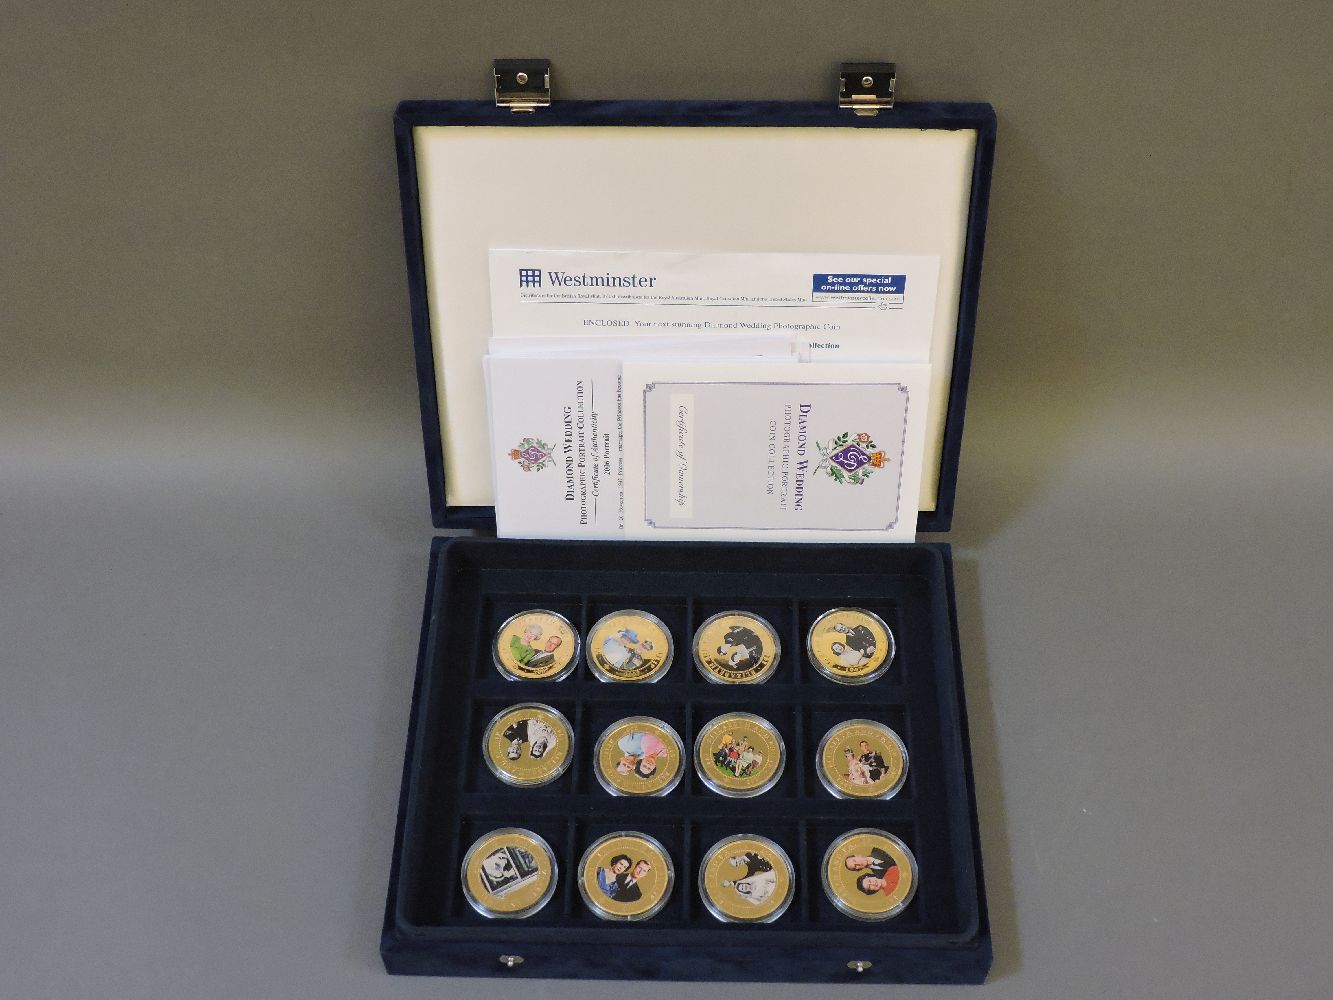 A Diamond Wedding photographic portrait coin collection, in case